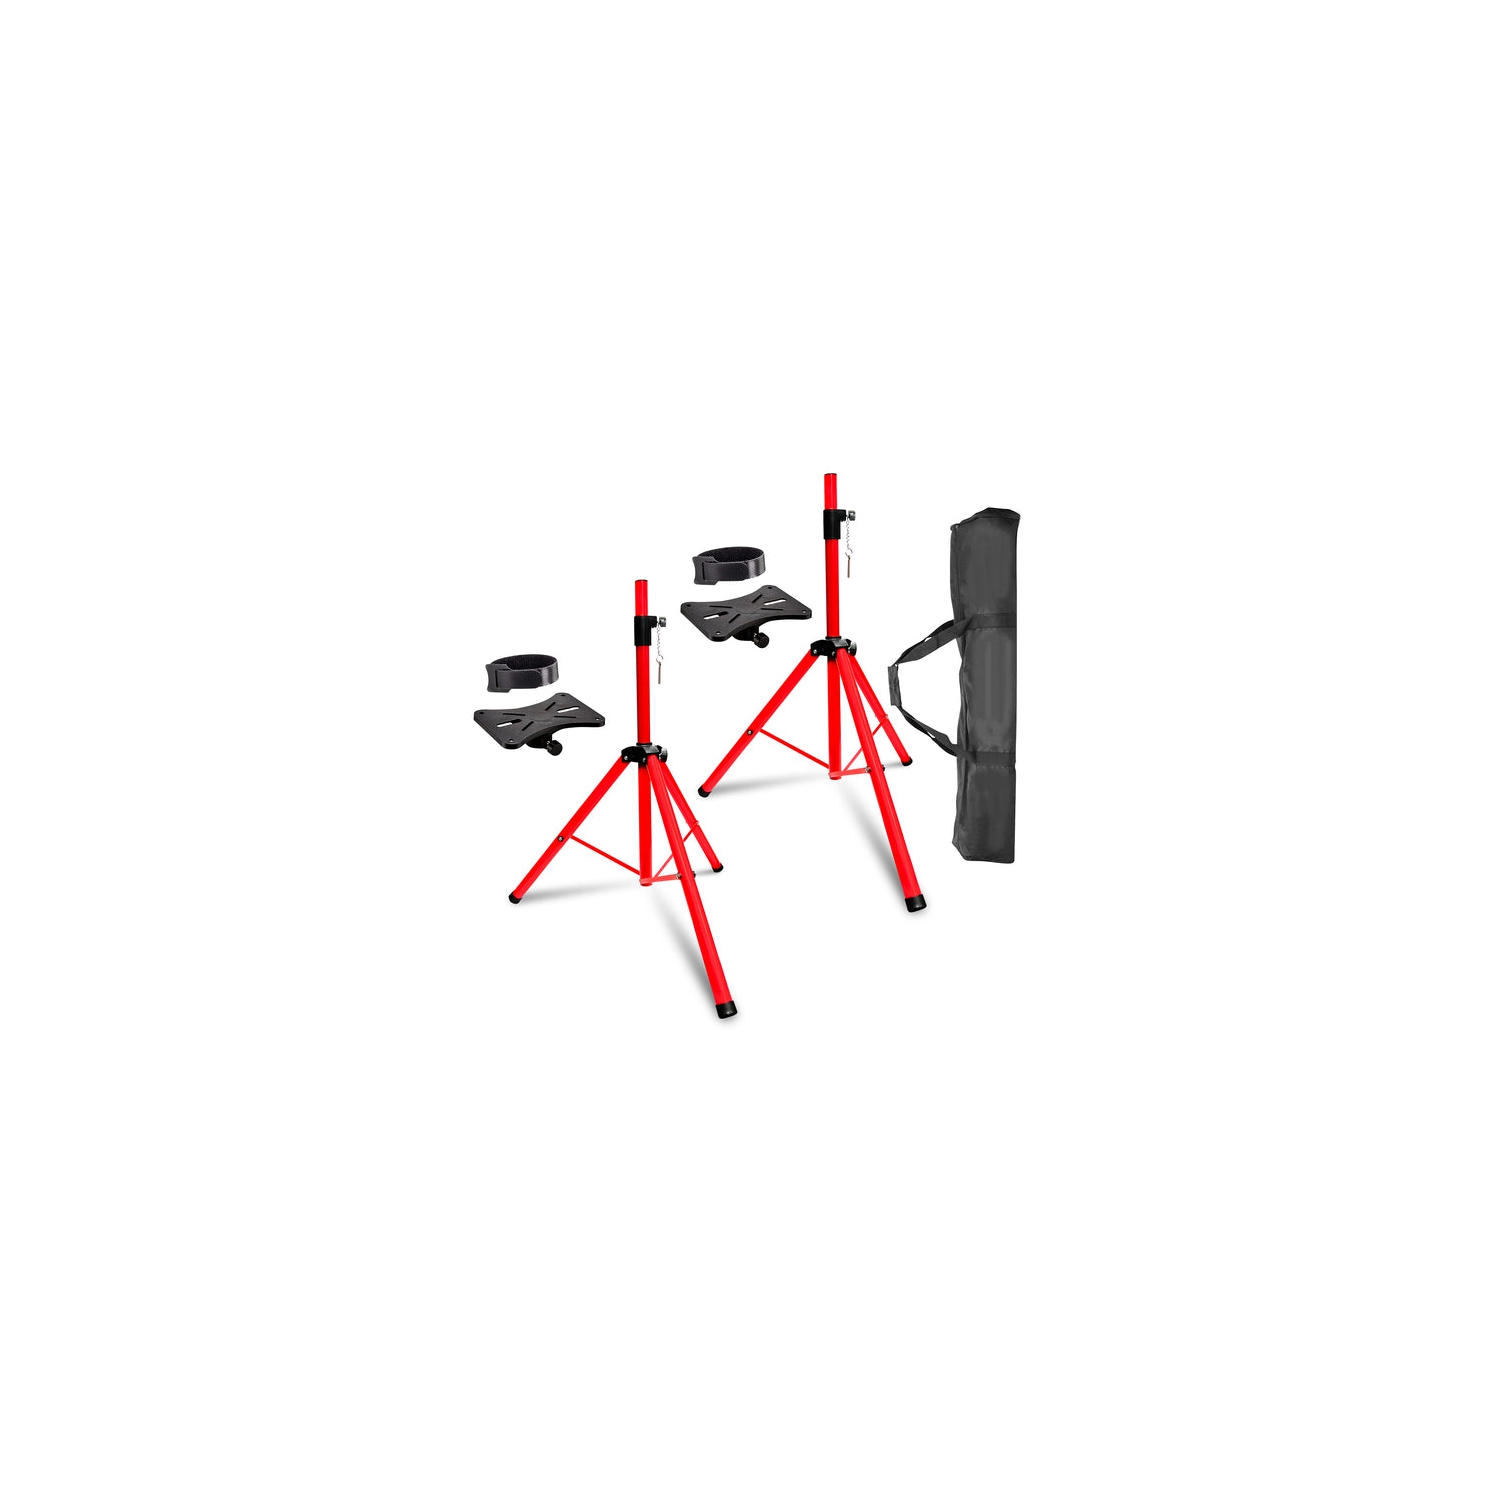 5 Core Speakers Stands 2 Pieces Red Heavy Duty Height Adjustable Tripod PA Speaker Stand For Large Speakers DJ Stand Para Bocinas Includes Carry Bag- SS HD 2 PK RED BAG